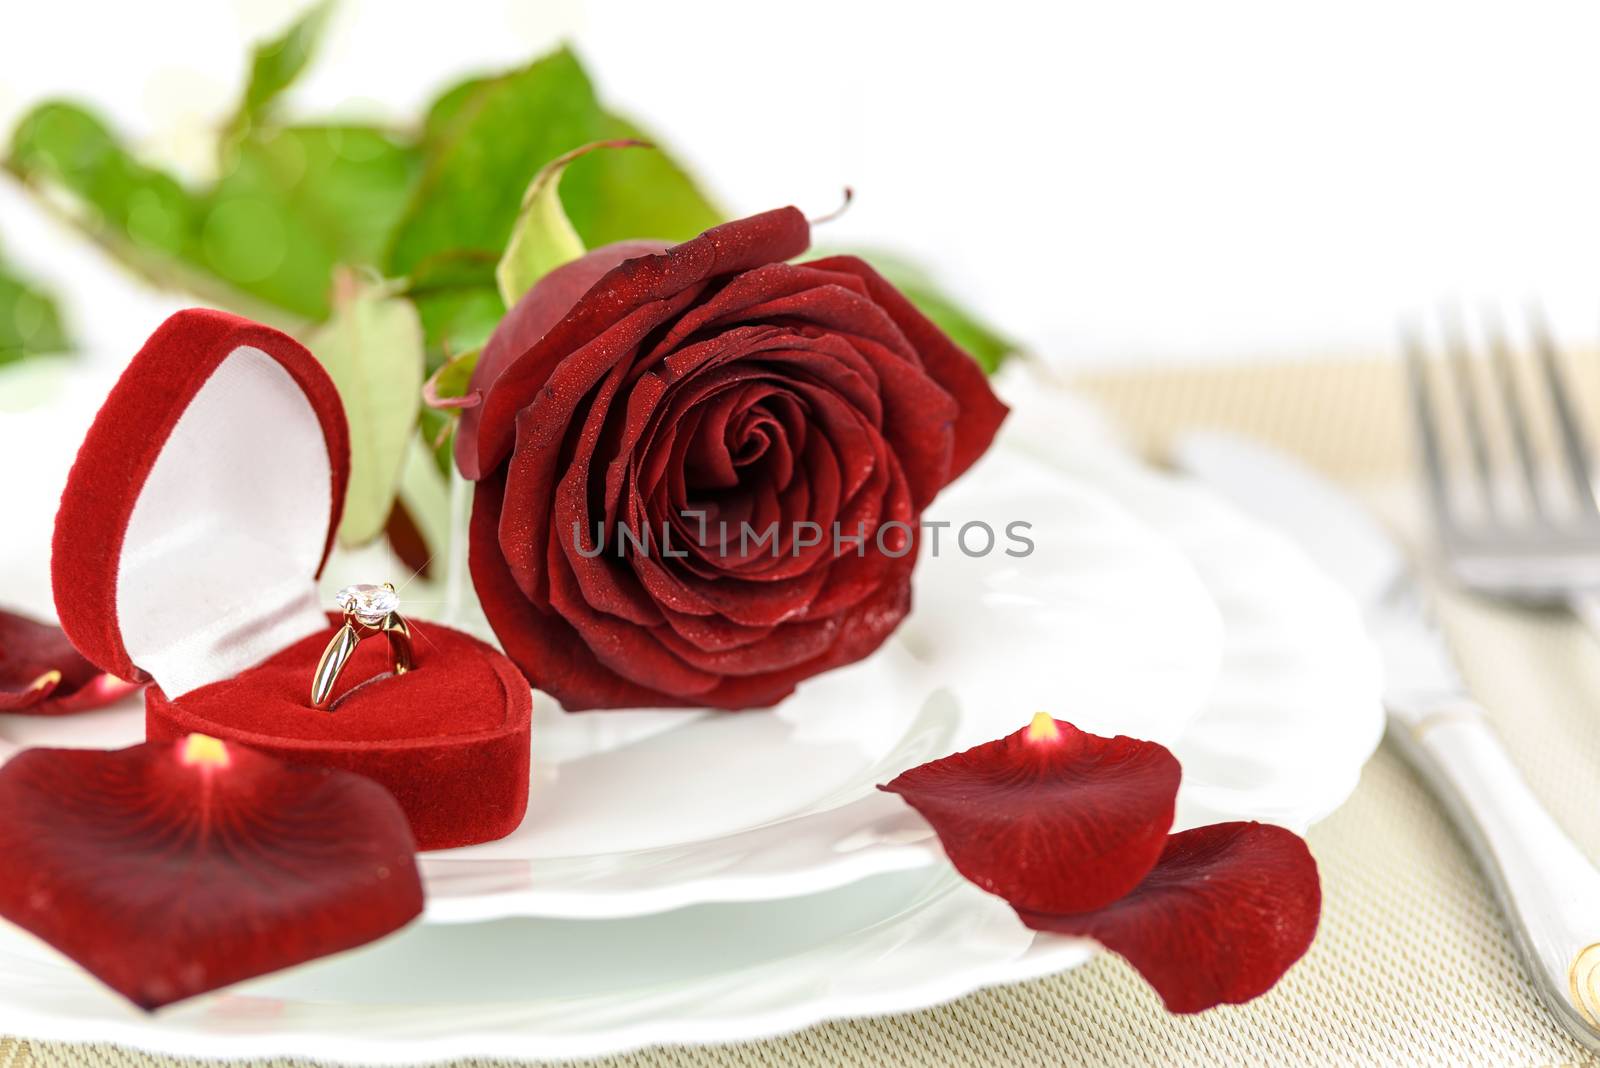 Gold engagement ring and red rose by wdnet_studio